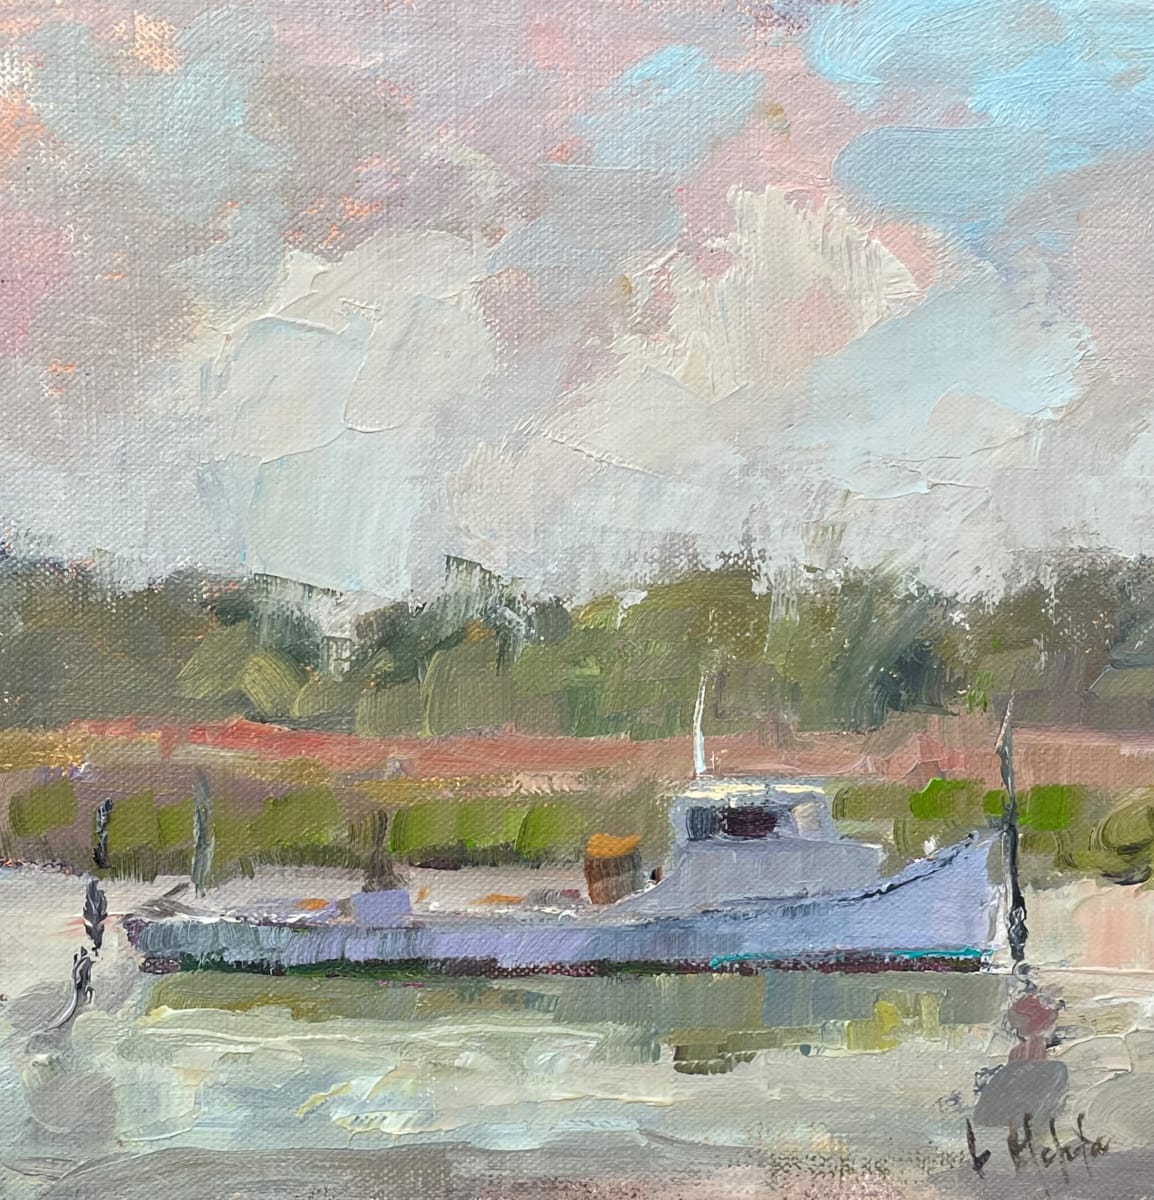 Work Boat at Rest by Lynn Mehta  Image: Work Boat at Rest, 10x10